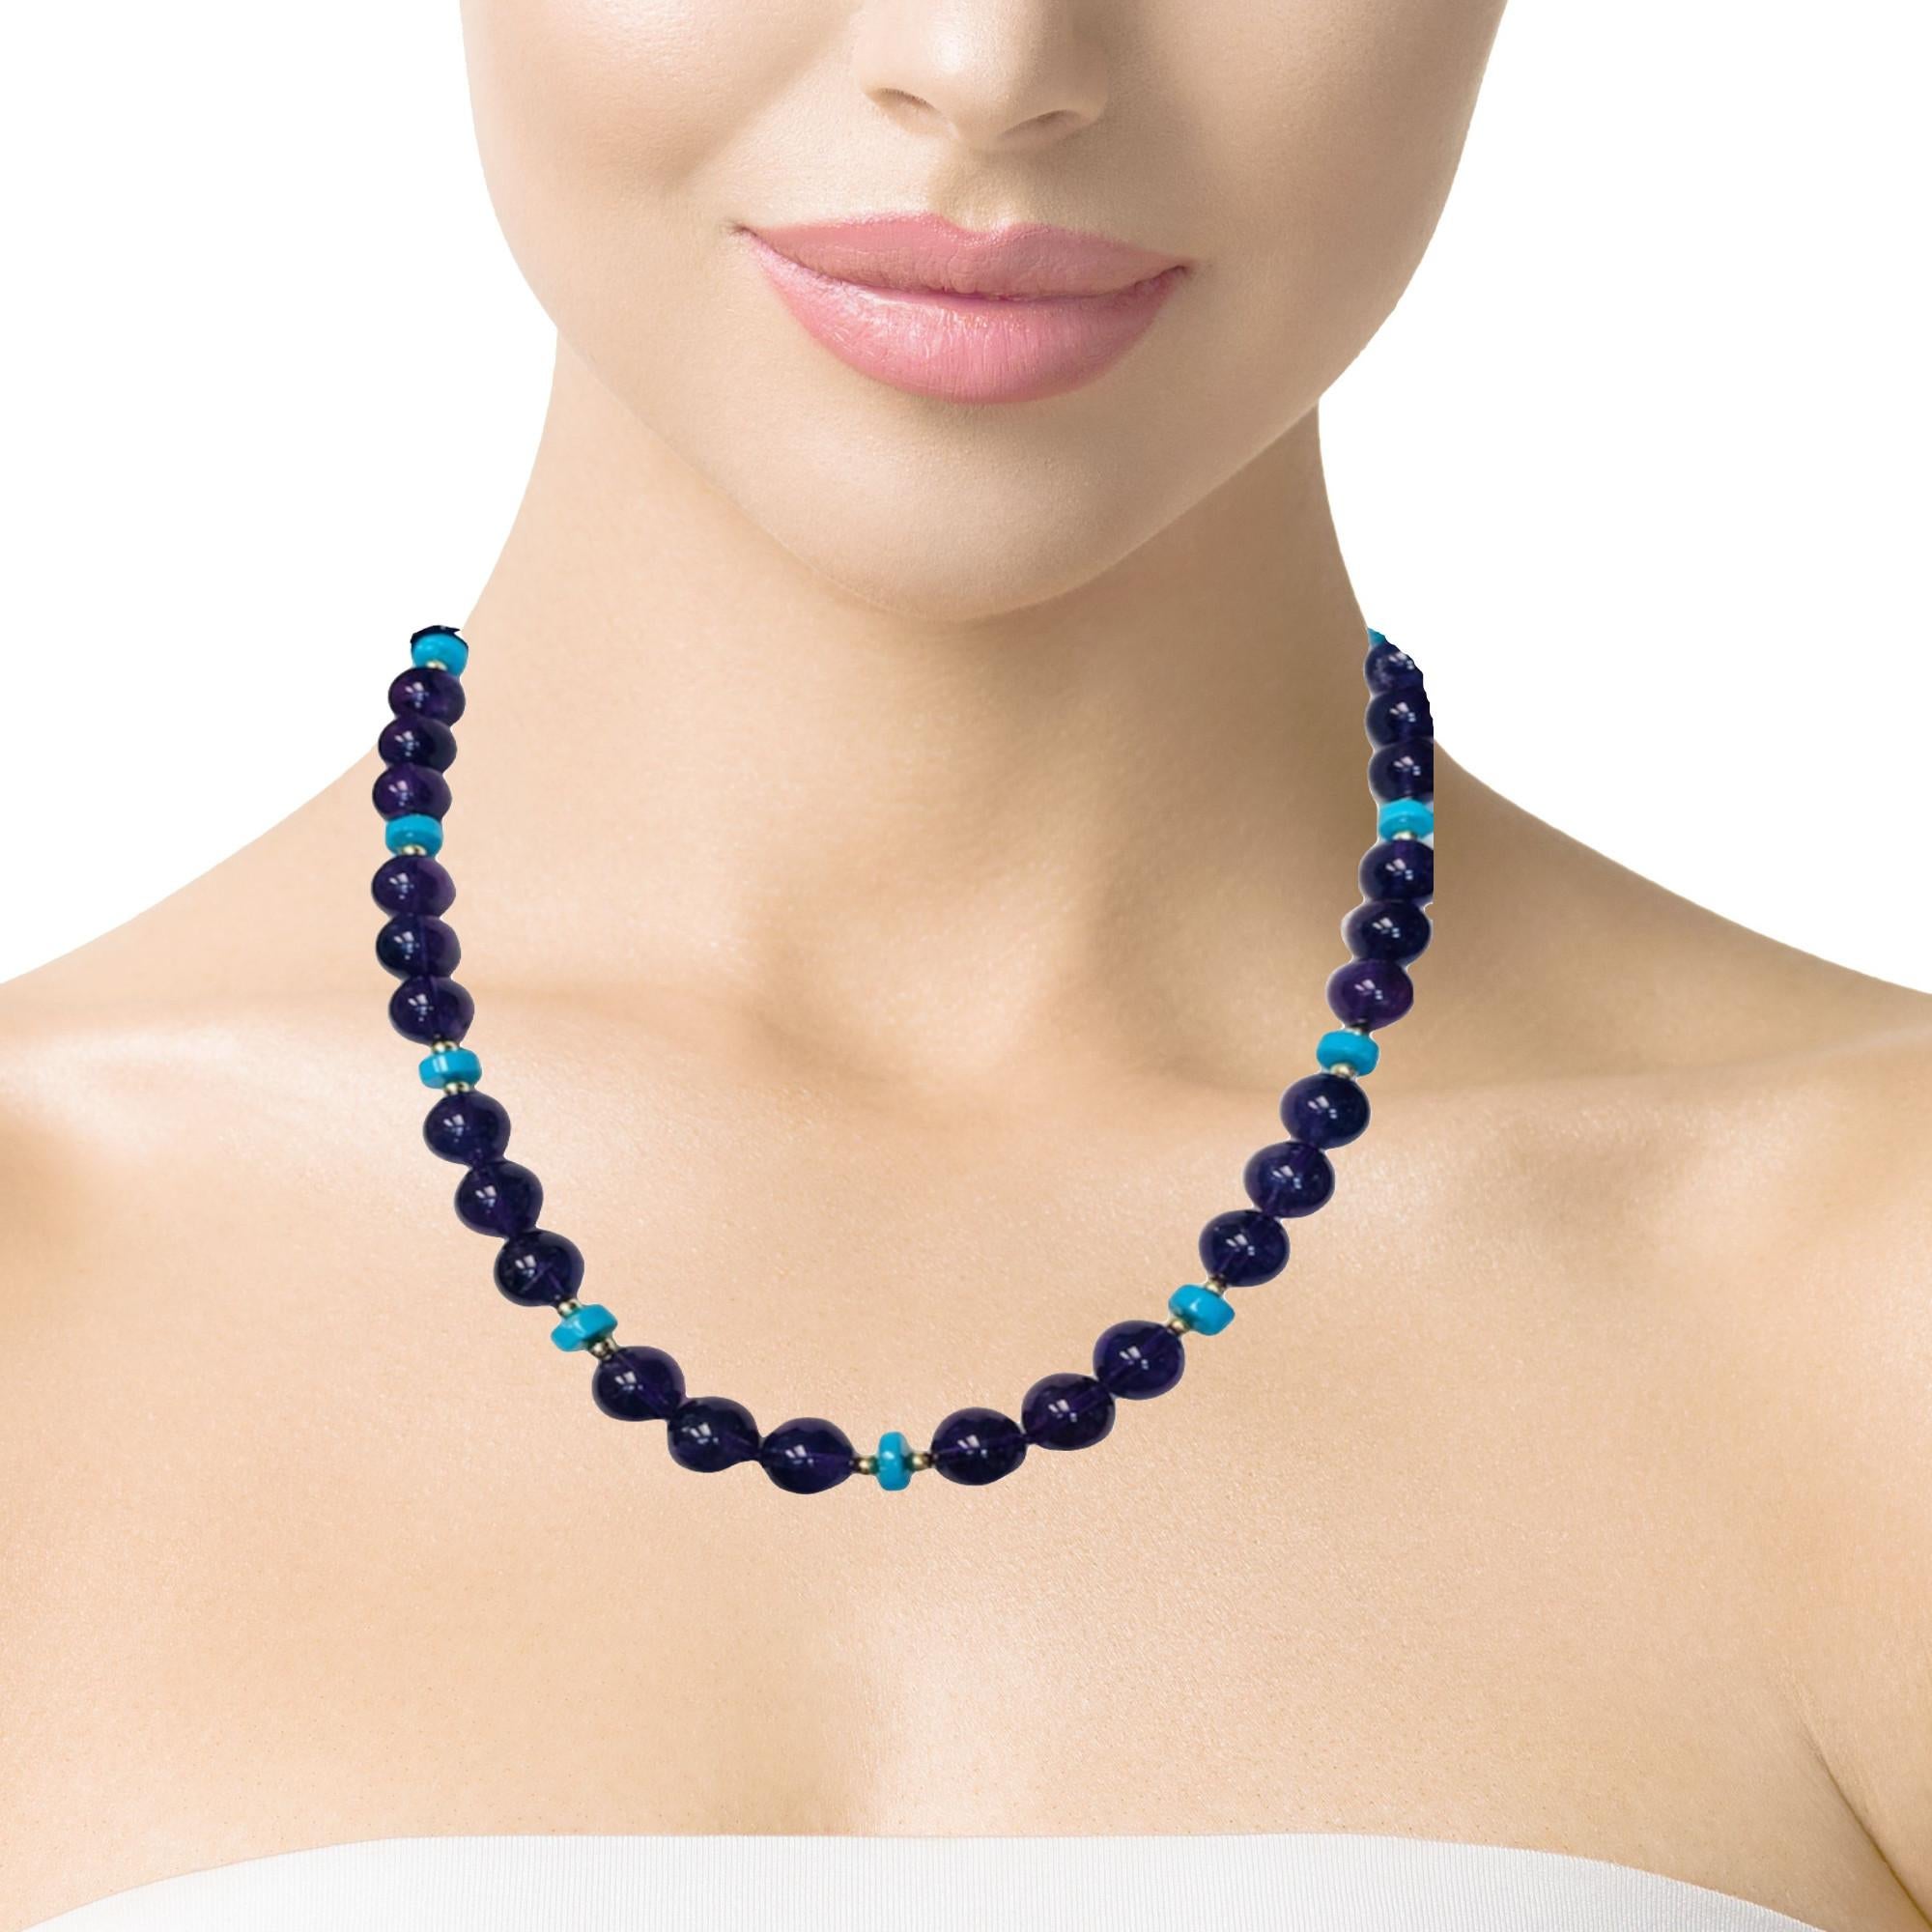 Women's Amethyst and Sleeping Beauty Turquoise Rondelle Bead Necklace